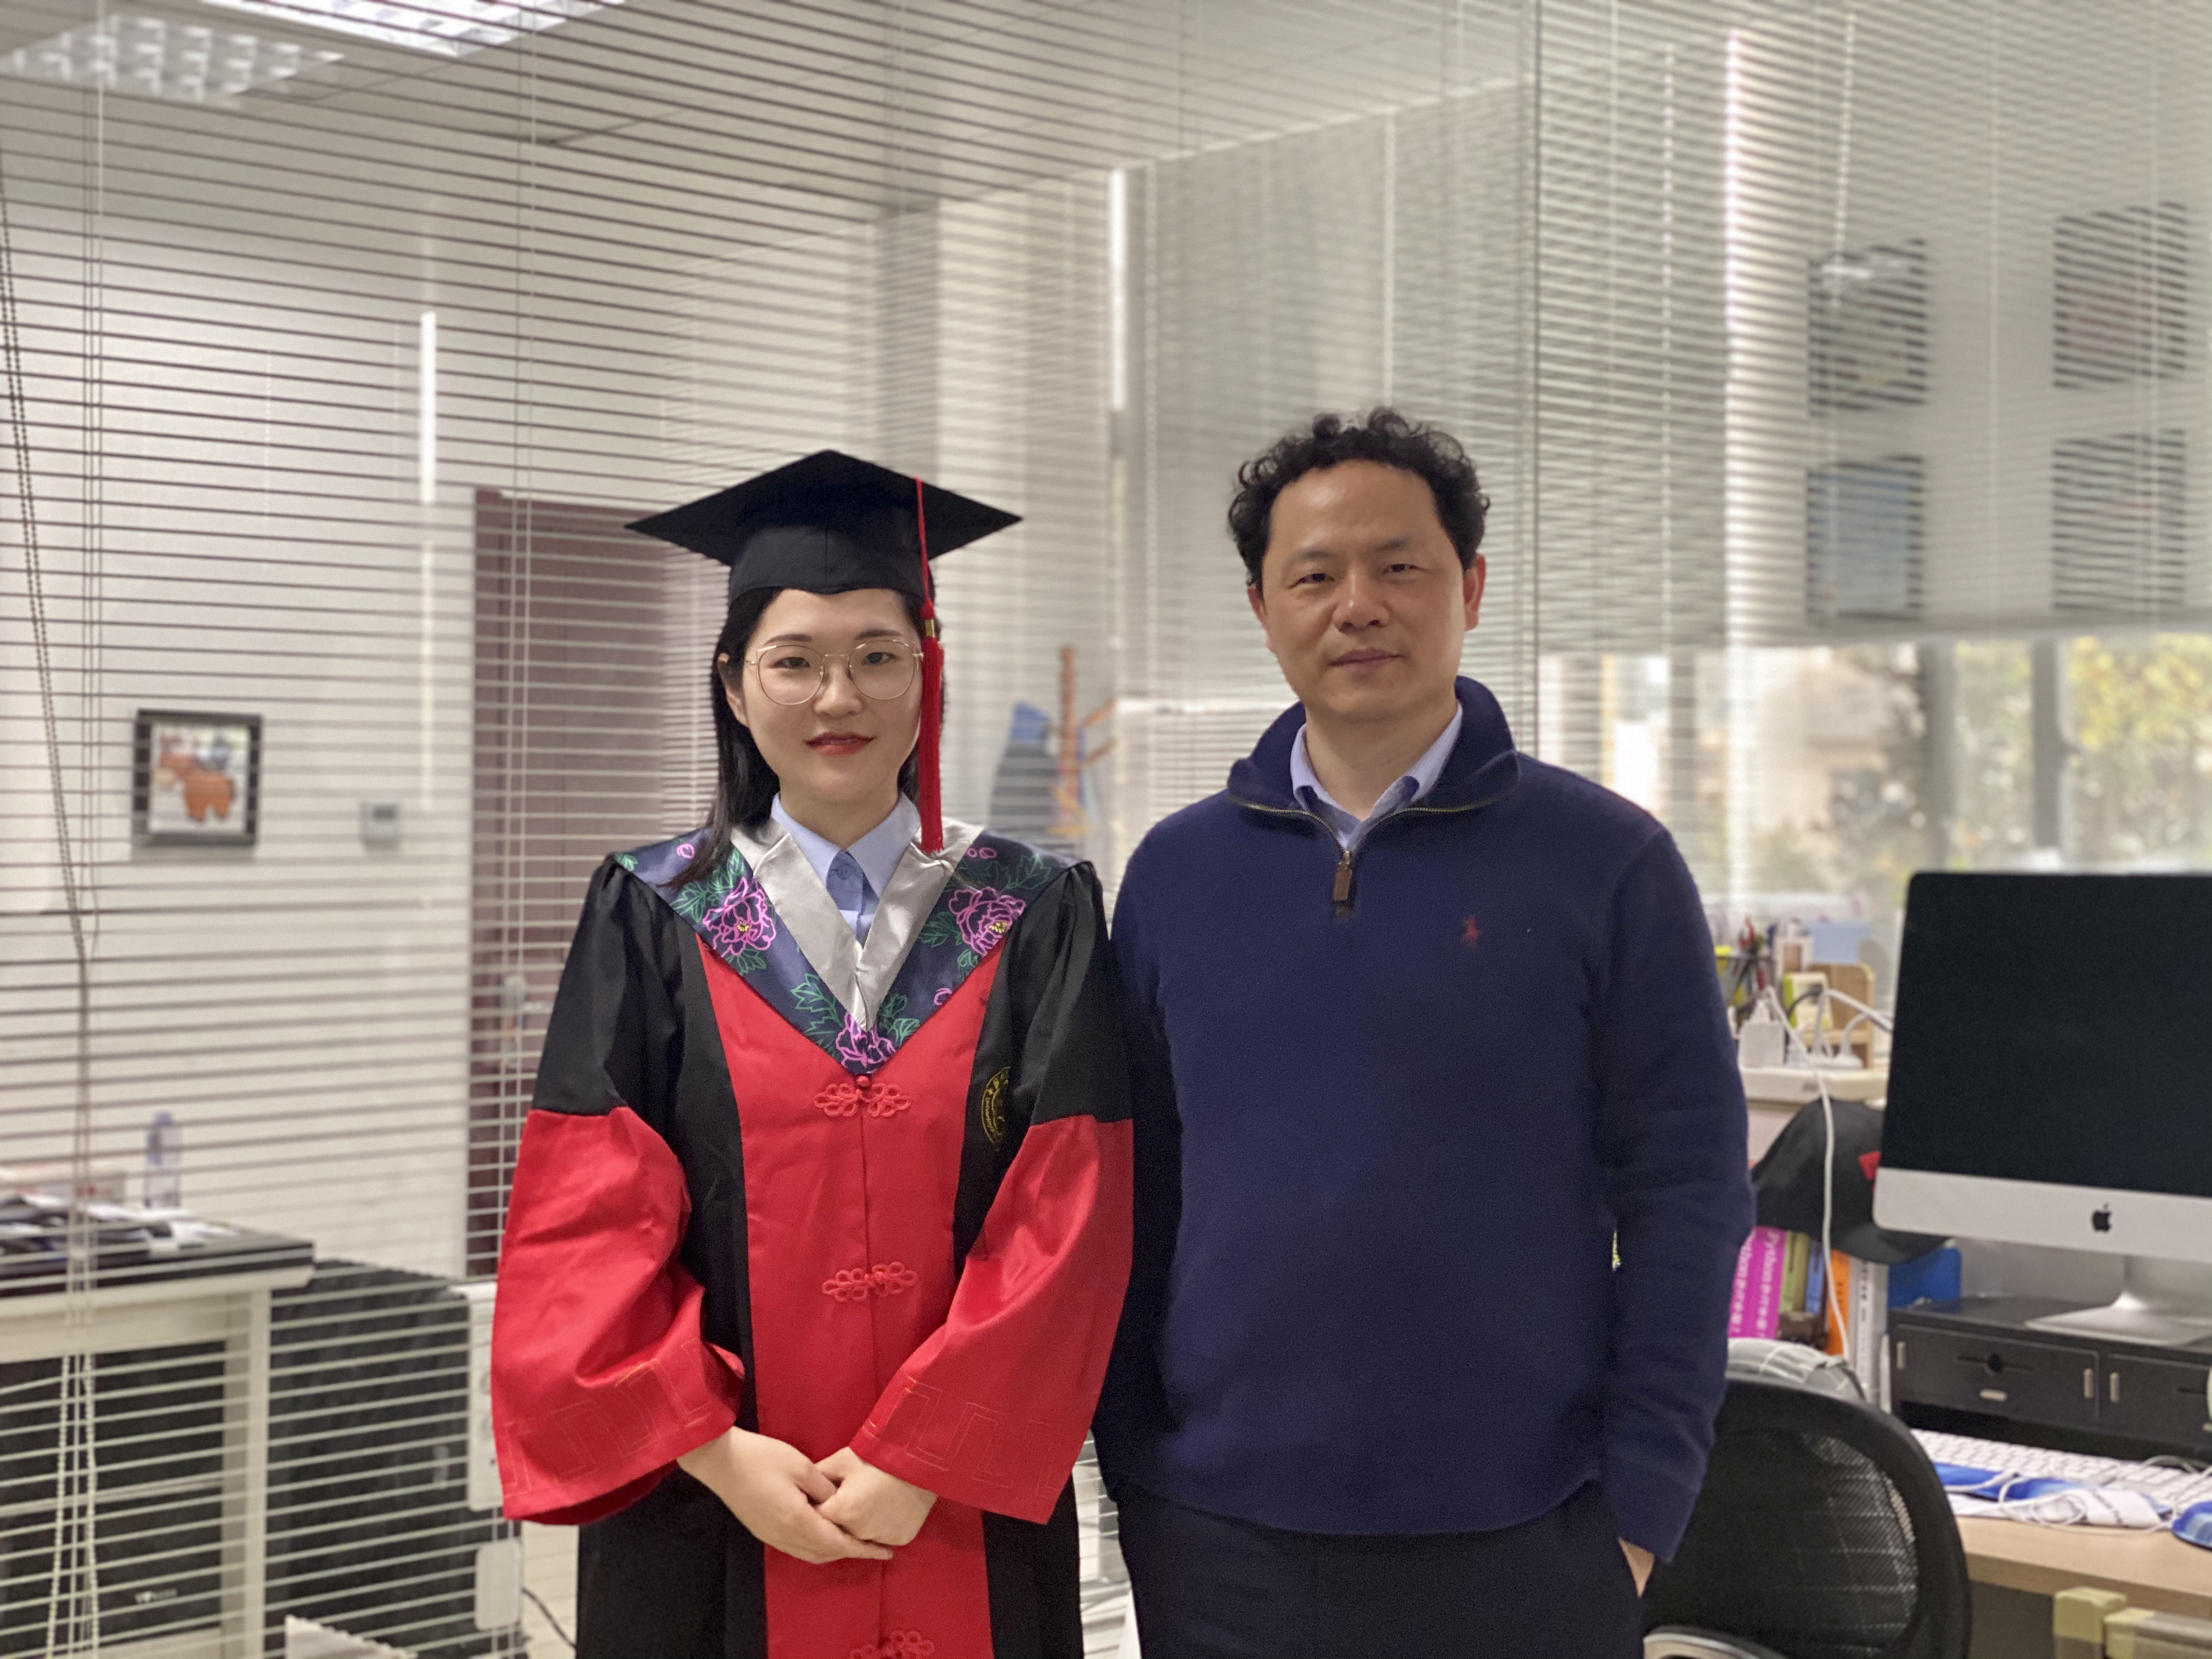 Congratulations to Dr. Zong!